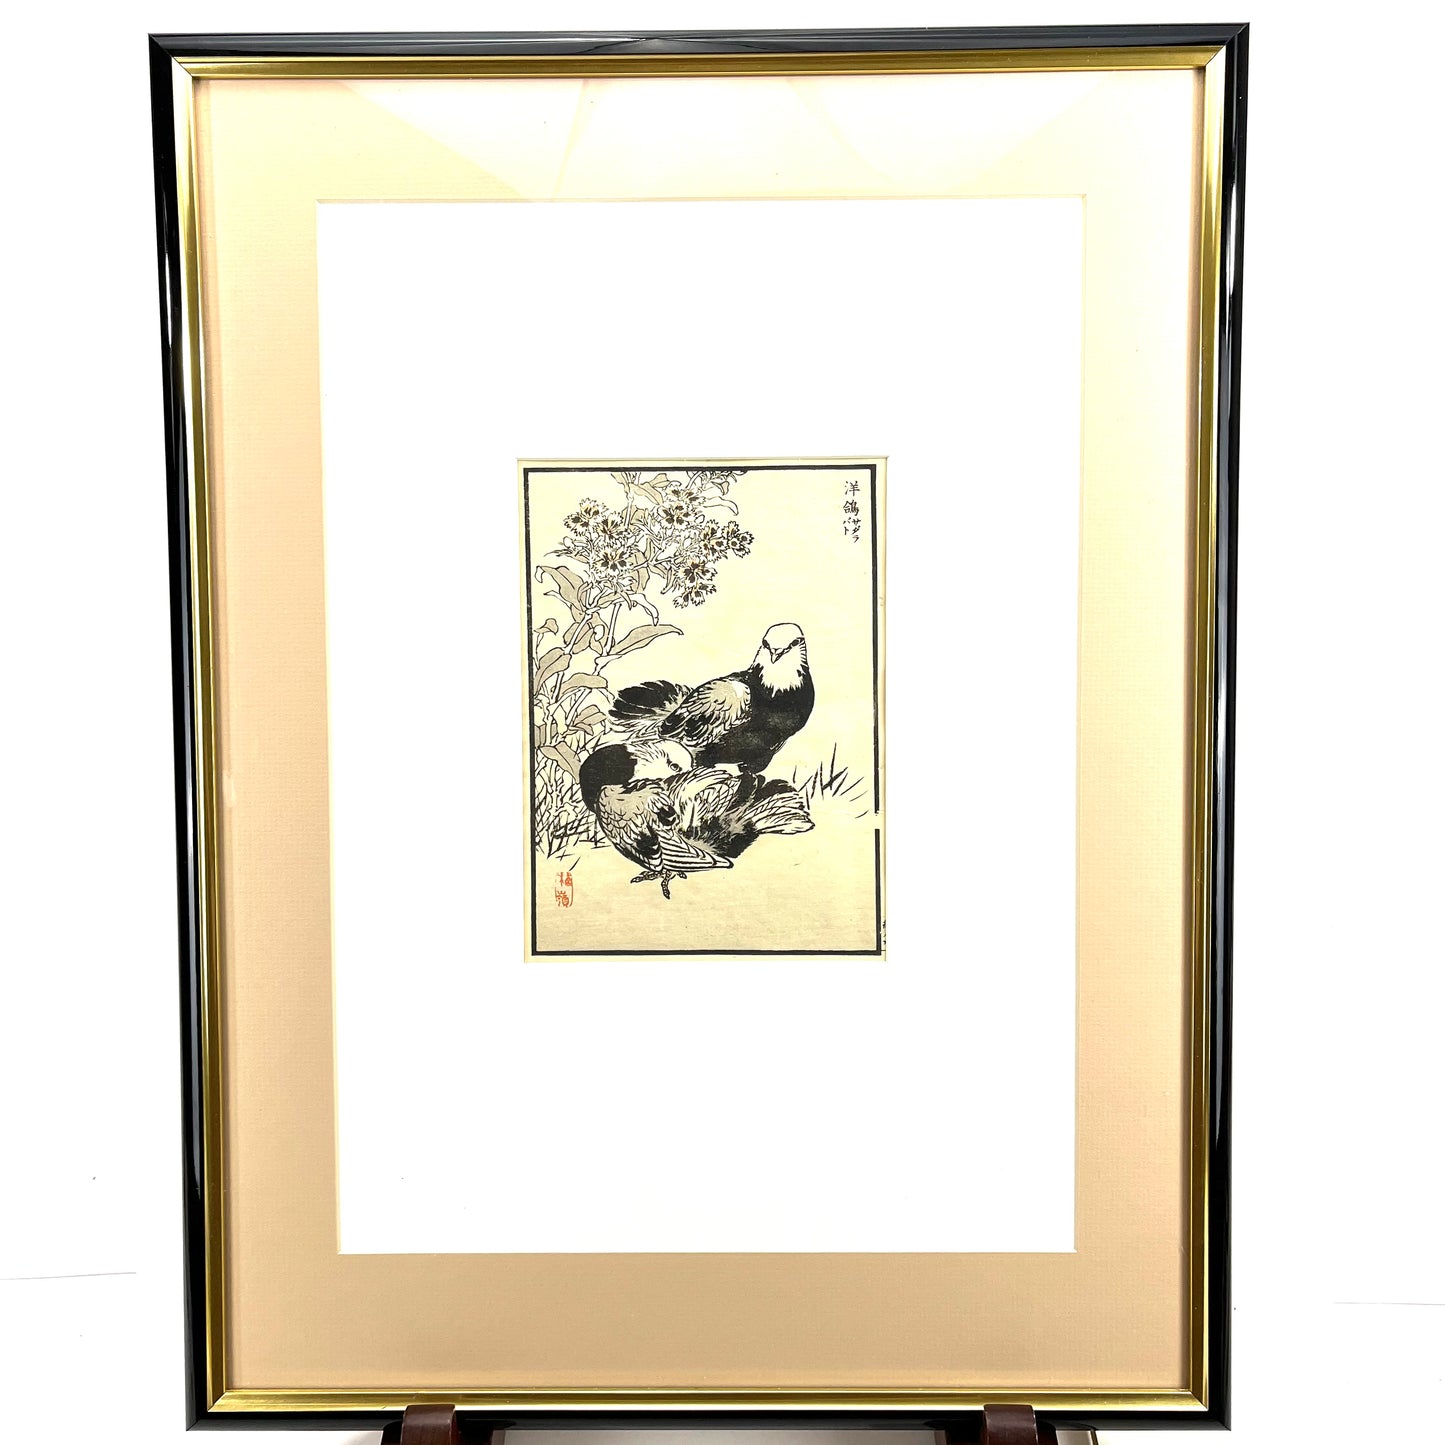 Antique Japanese Woodblock Print of Two Pigions Framed & Matted 17"